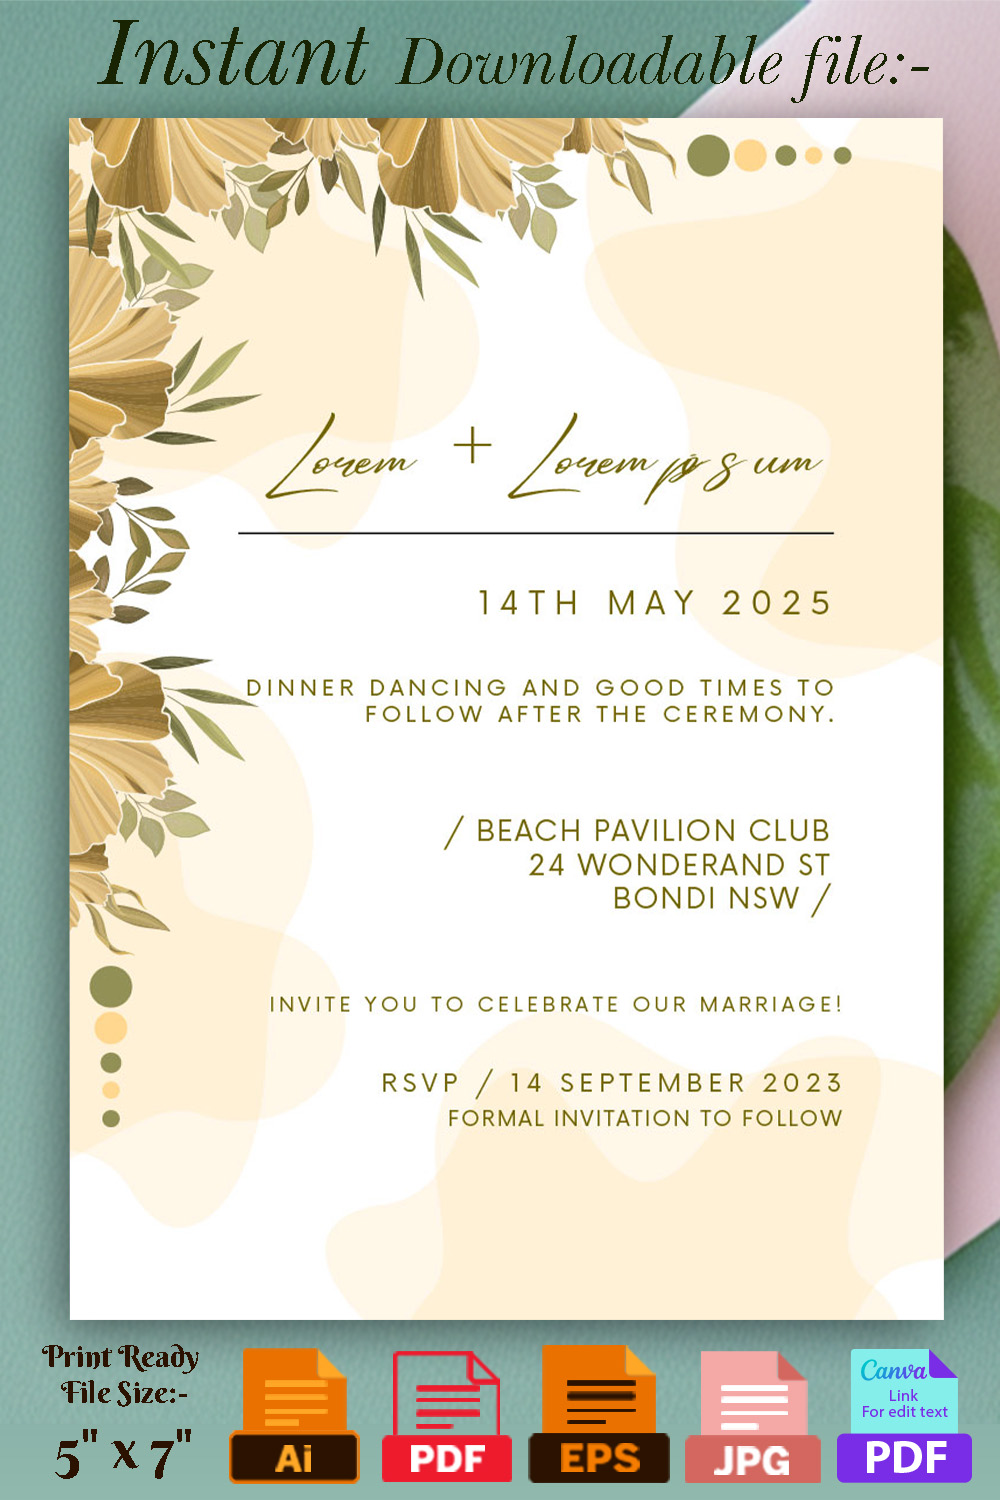 Image with beautiful wedding invitation in pastel colors and flowers.